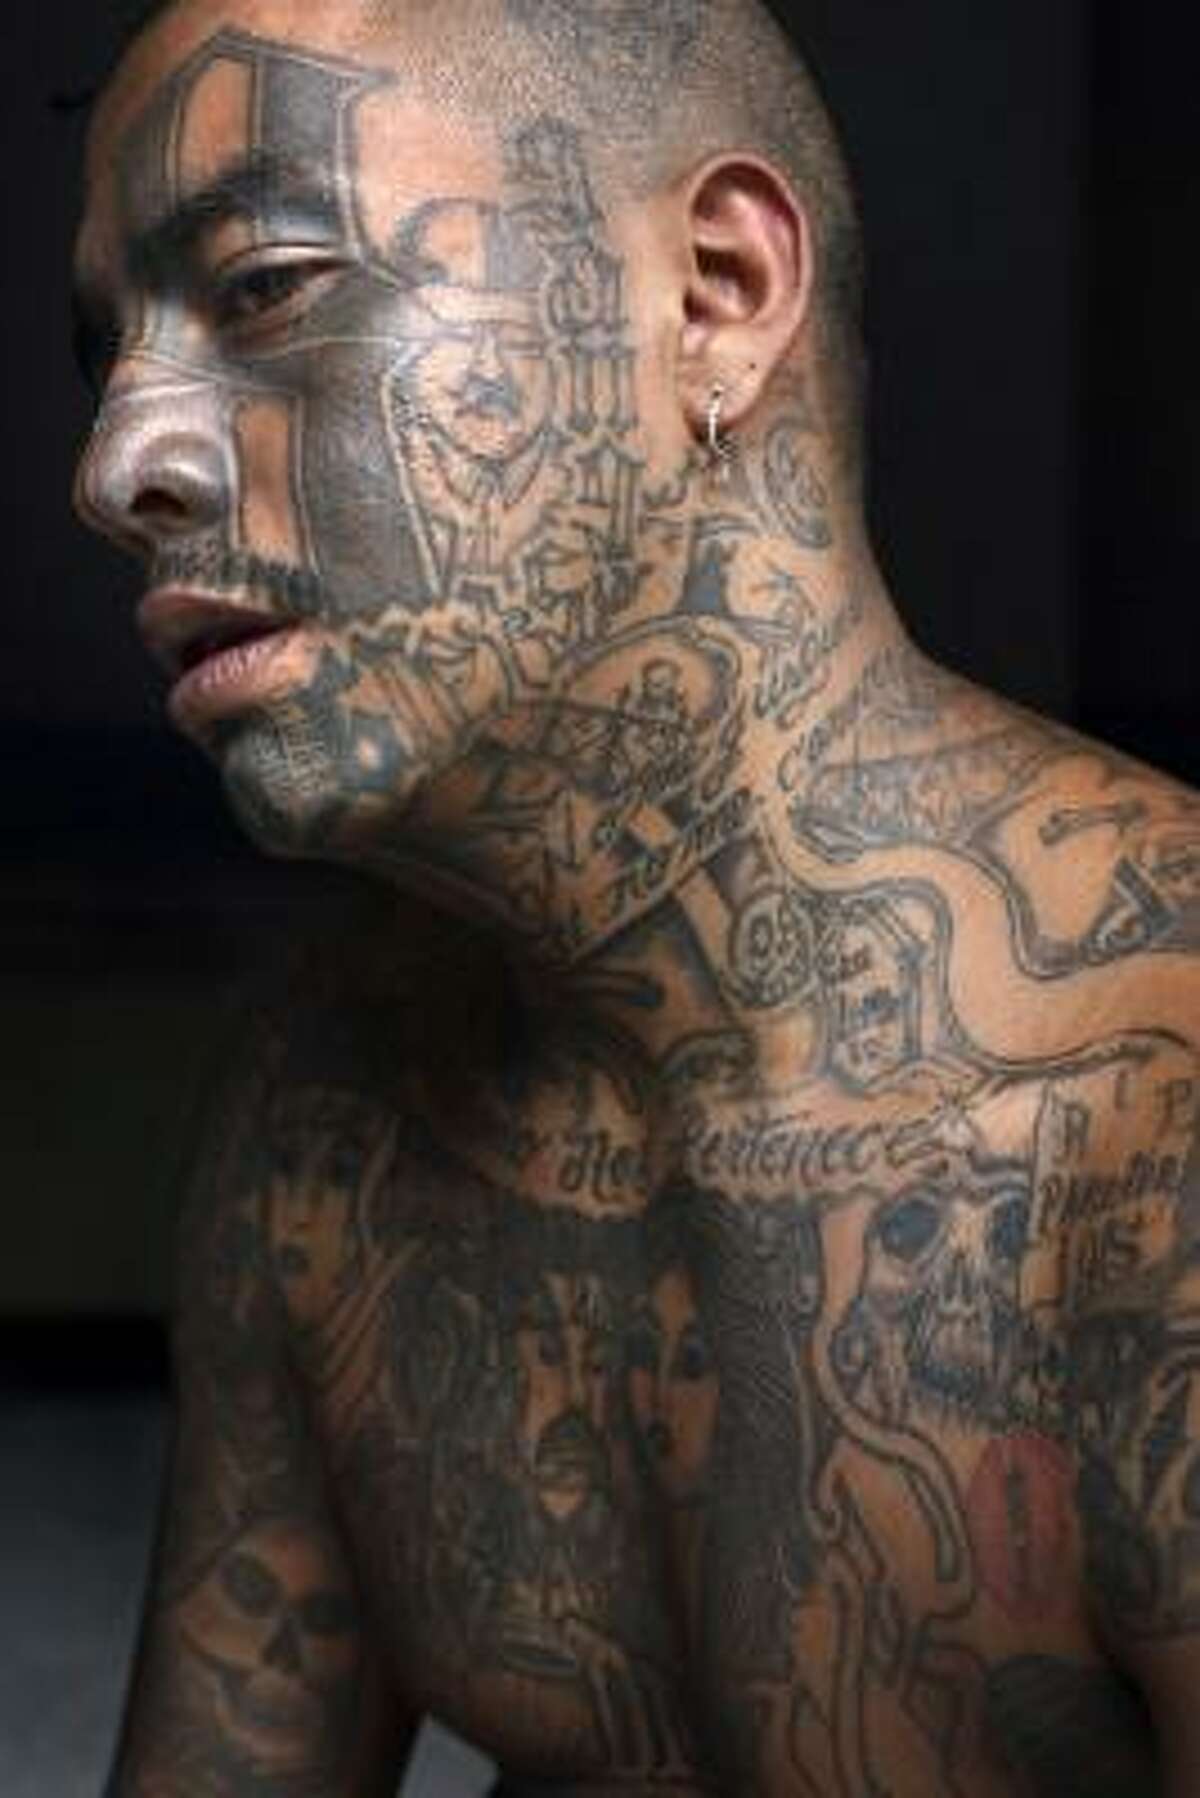 A Mara gang member who identifies himself as "Smoking," 25, poses for his portrait in prison in Chimaltenango, Guatemala, in this Oct. 19 file photo. After anti-gang laws were approved in Honduras and El Salvador, and a string of killings in Guatemala committed by neighbors and security forces, gang members have stopped tattooing themselves.